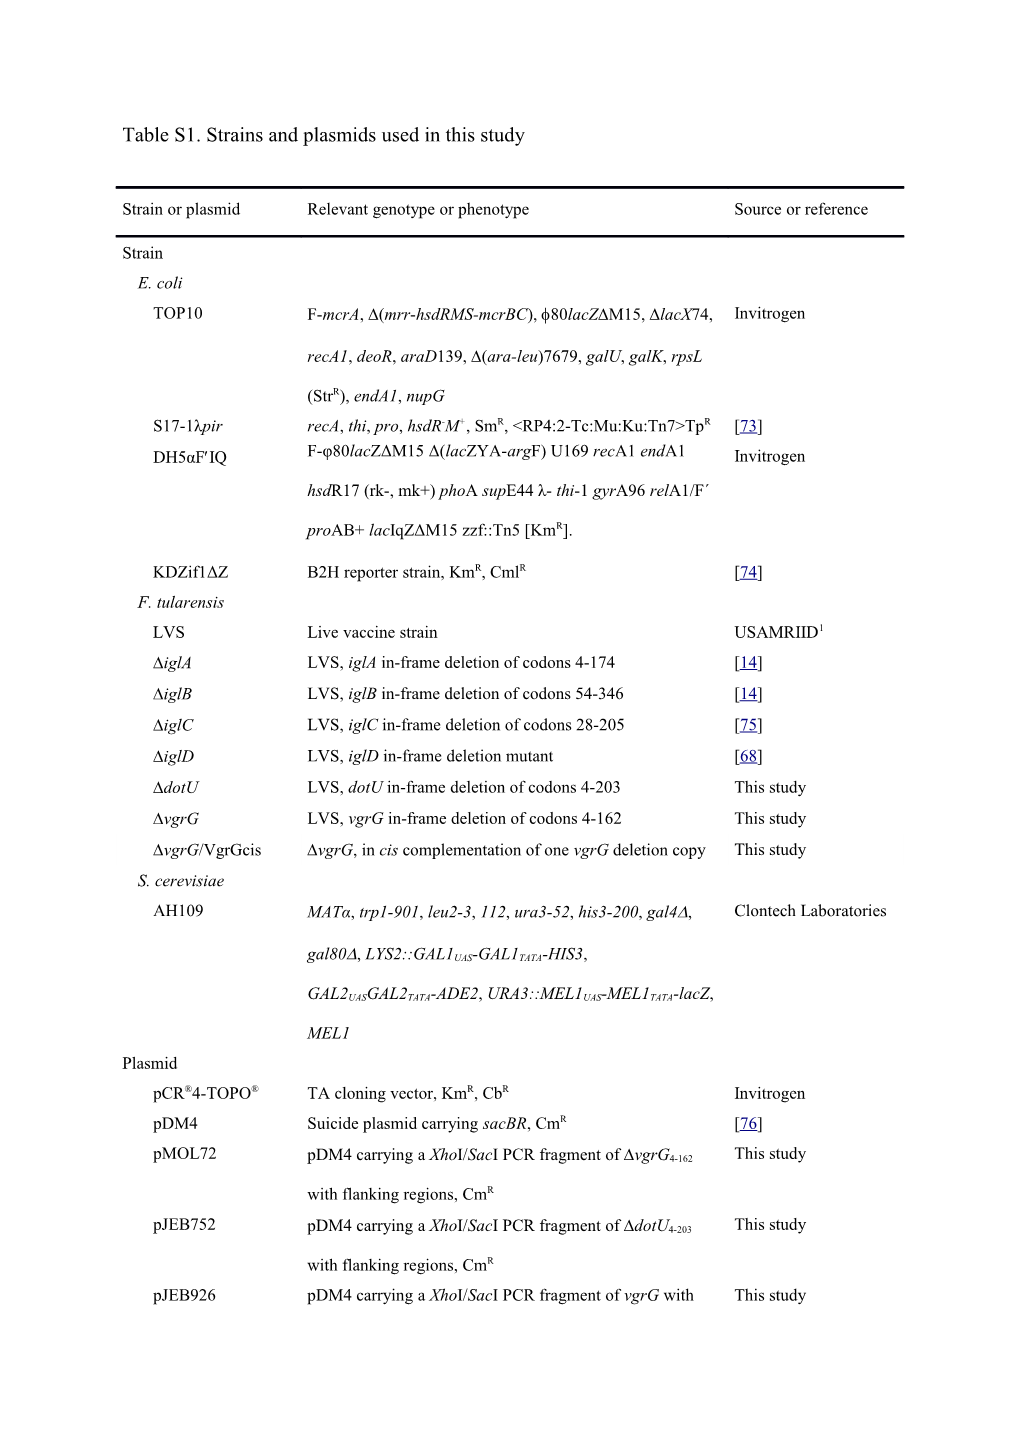 Table S1. Strains and Plasmids Used in This Study